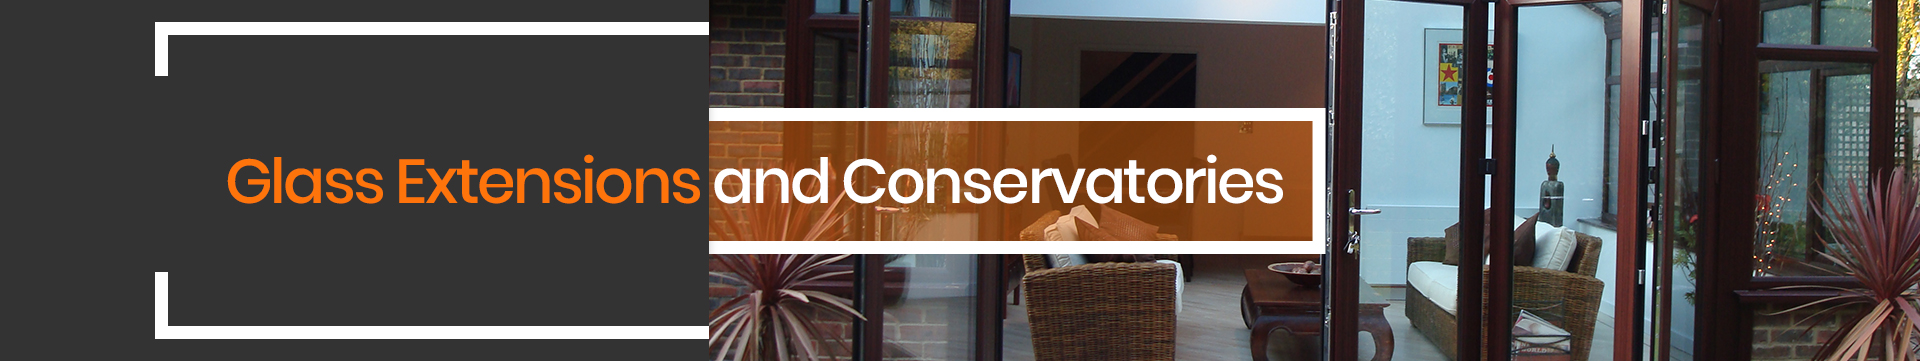 Glass Extensions and Conservatories banner Facelift